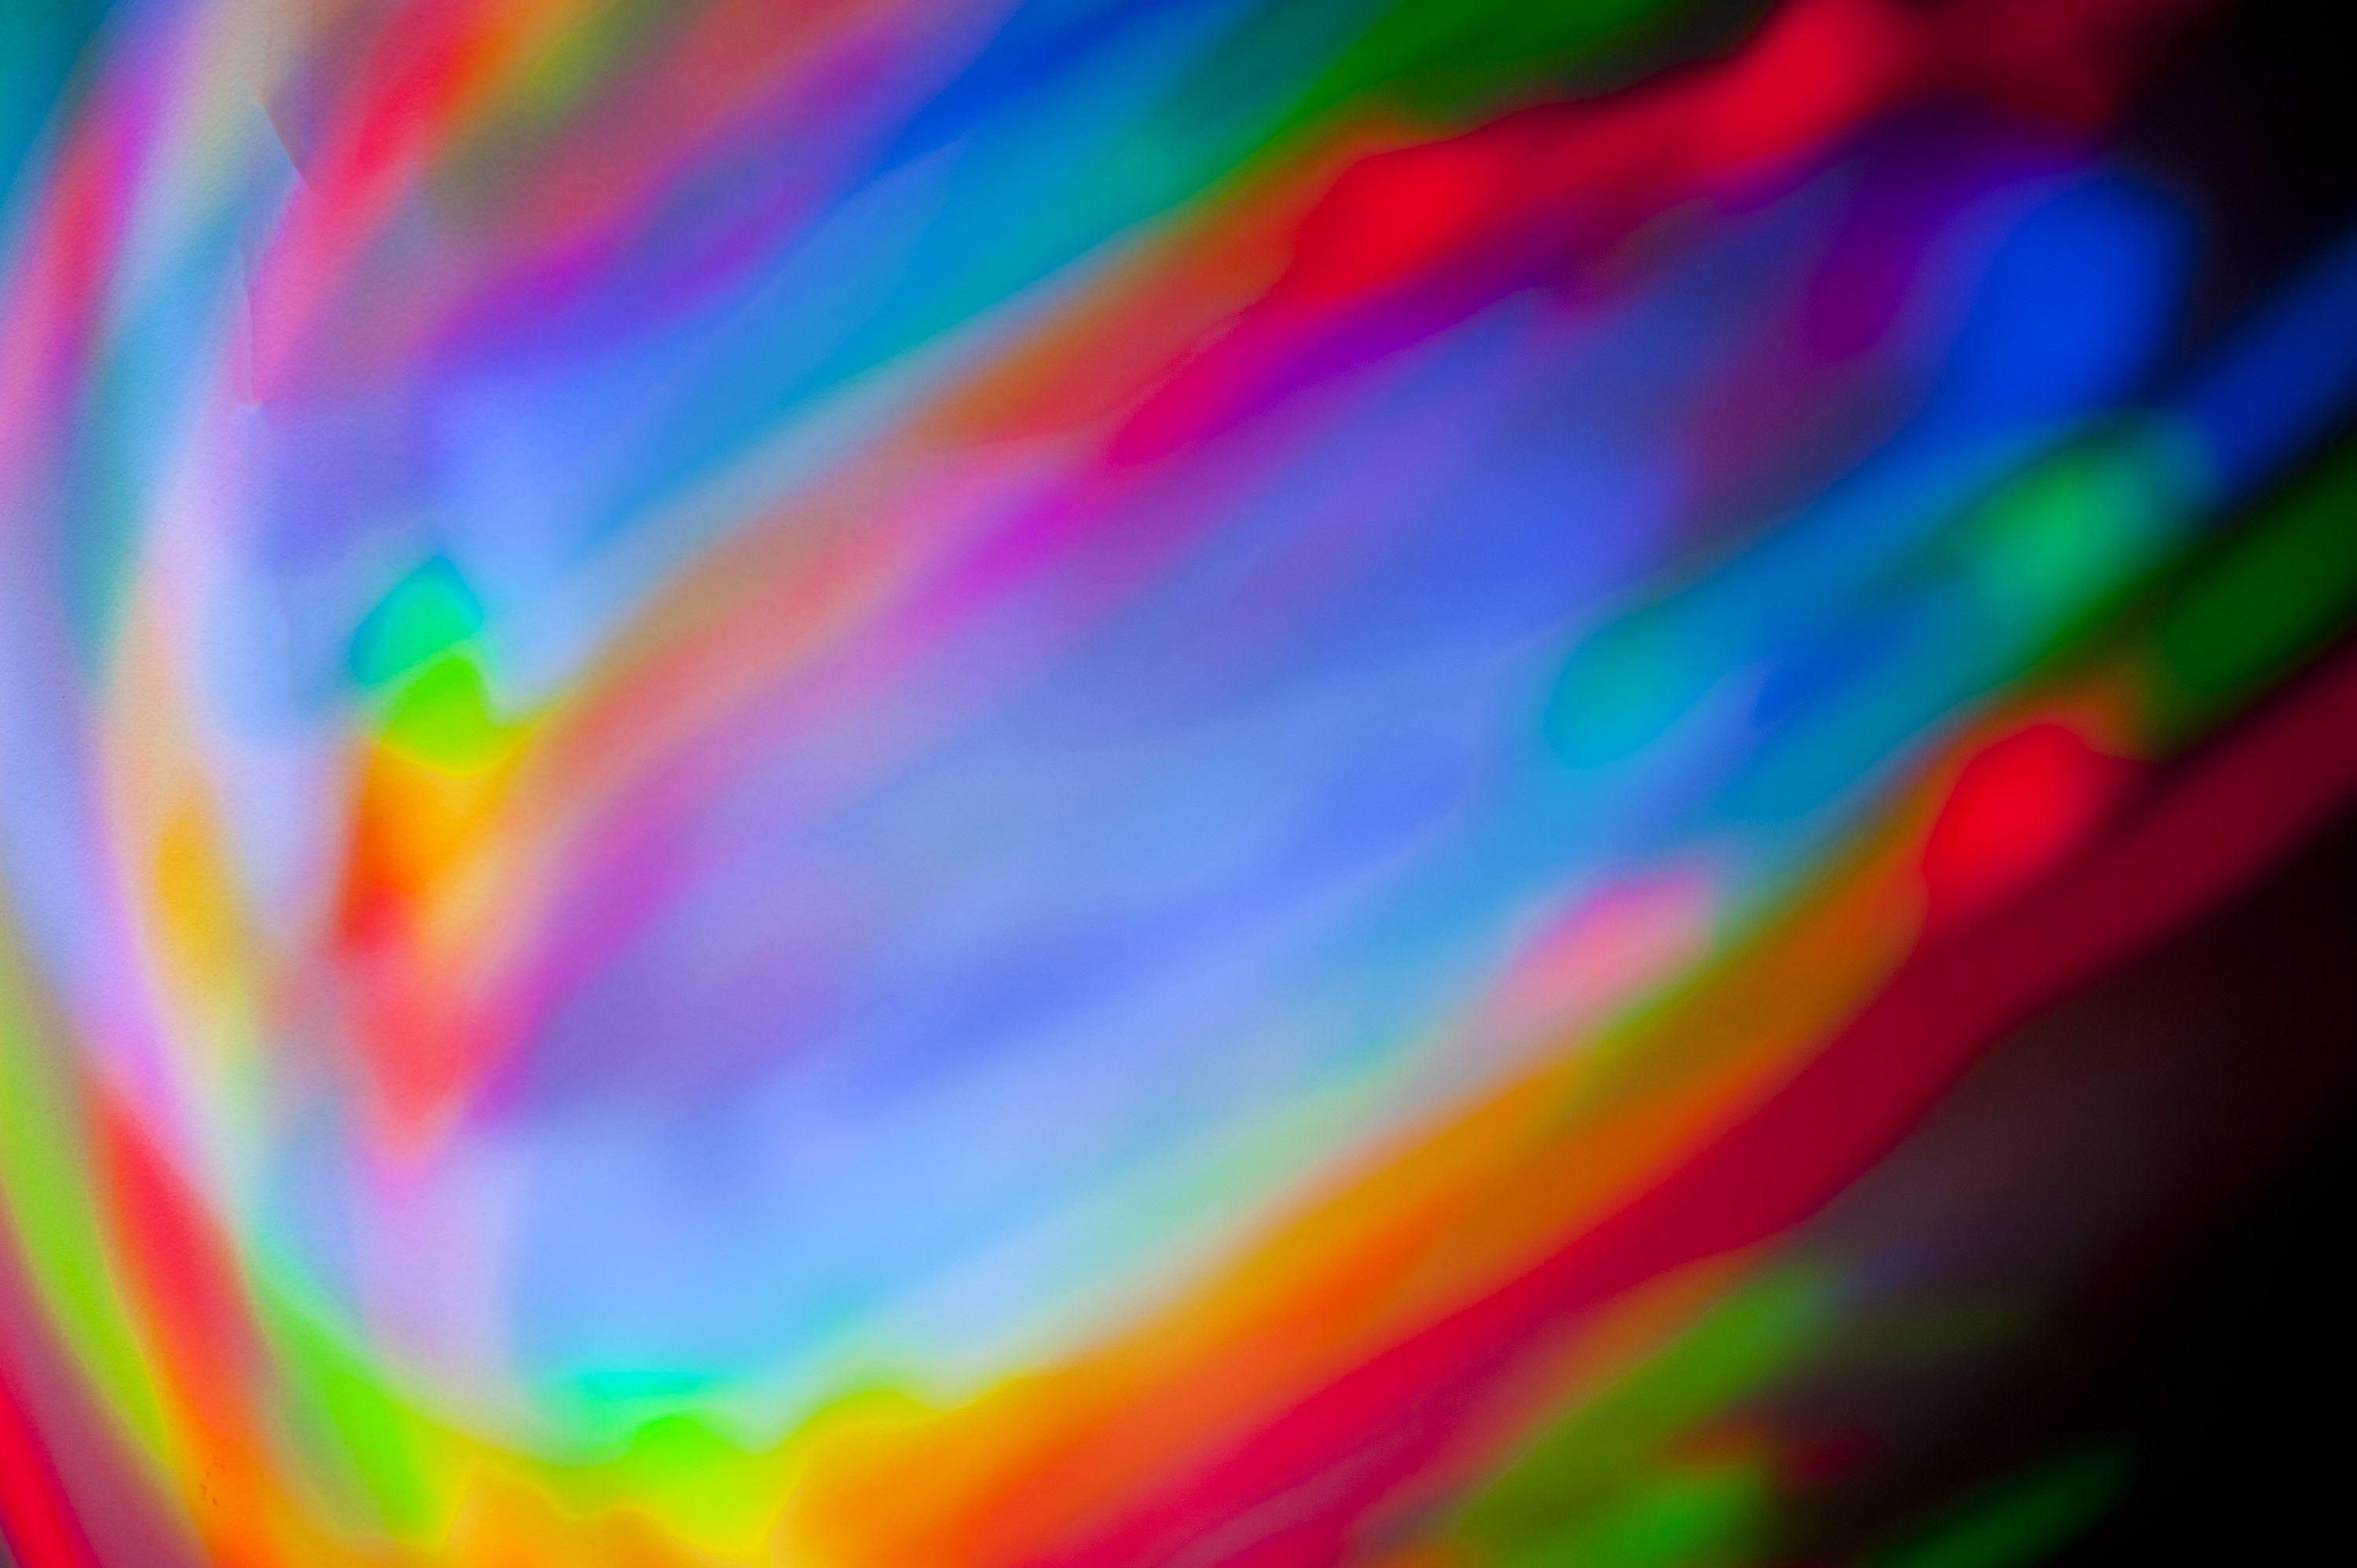 psychedelic additive colours. Free background and textures